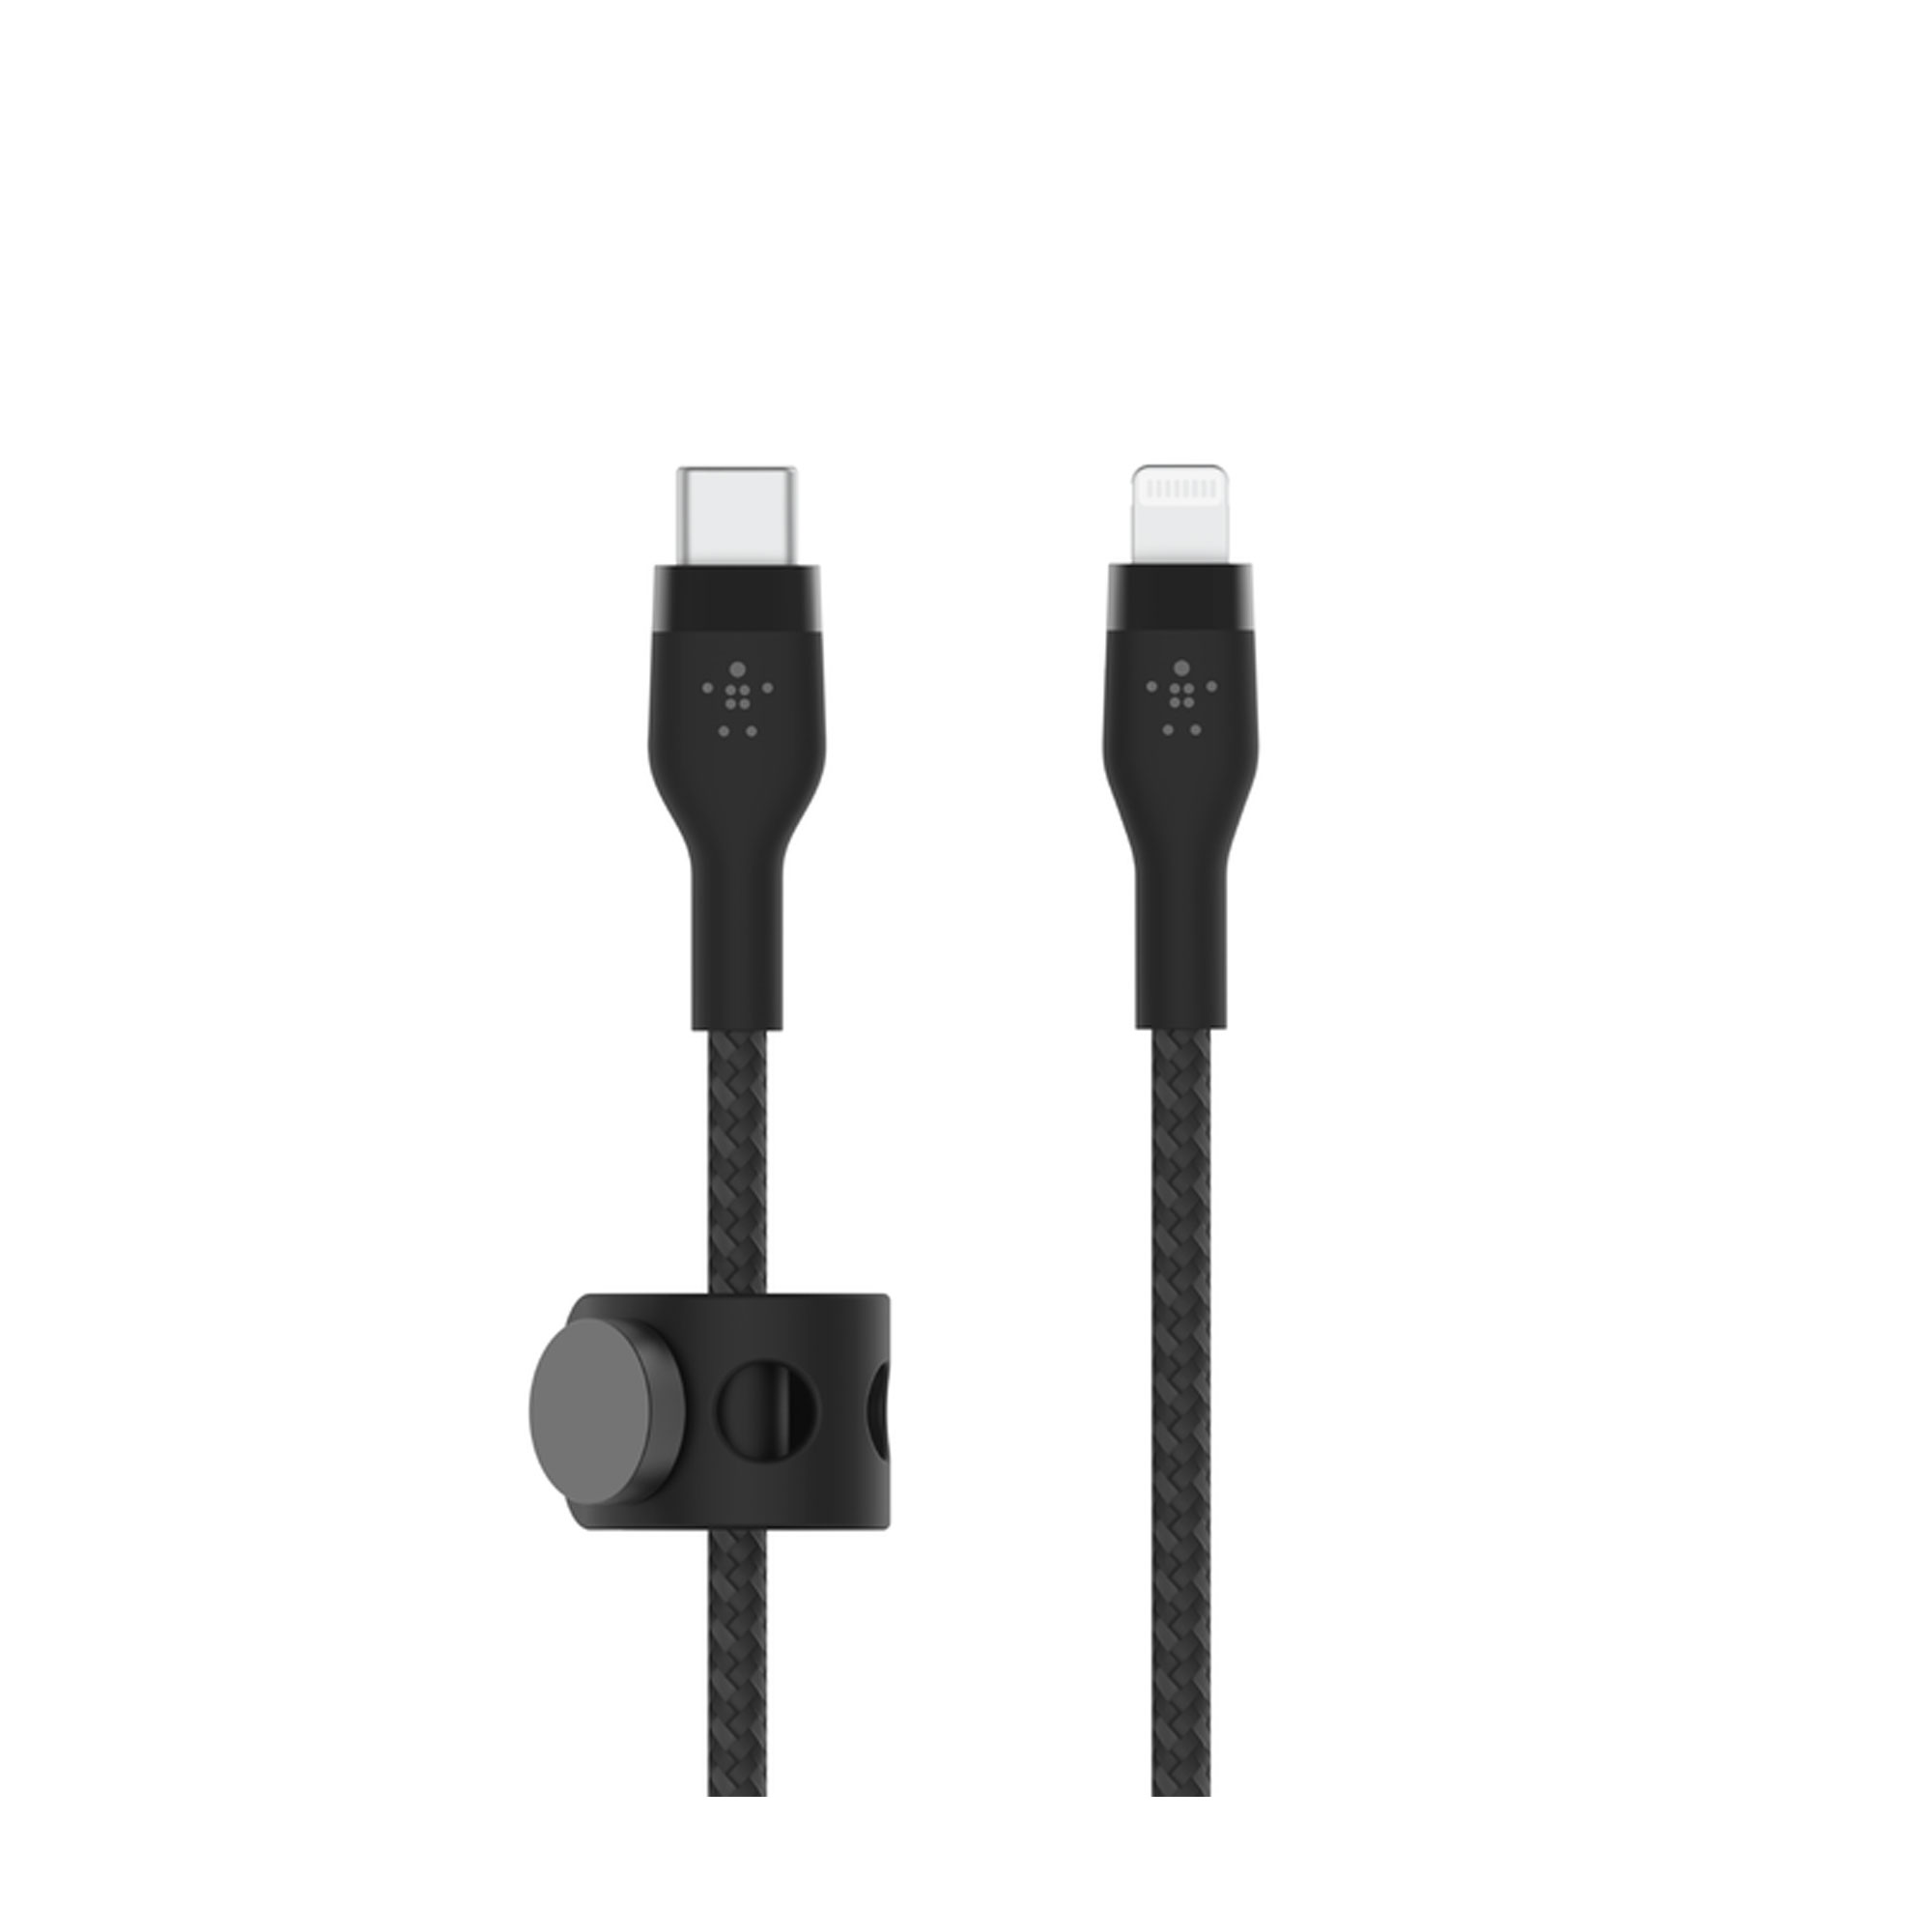 Belkin Boost charger pro flex usb-c cable with lightning connector